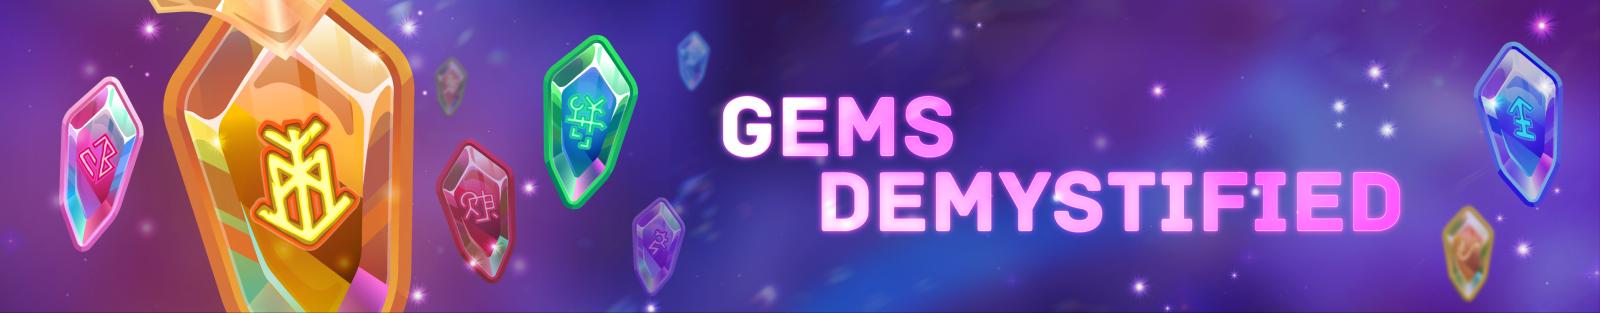 All About Genesis Gems